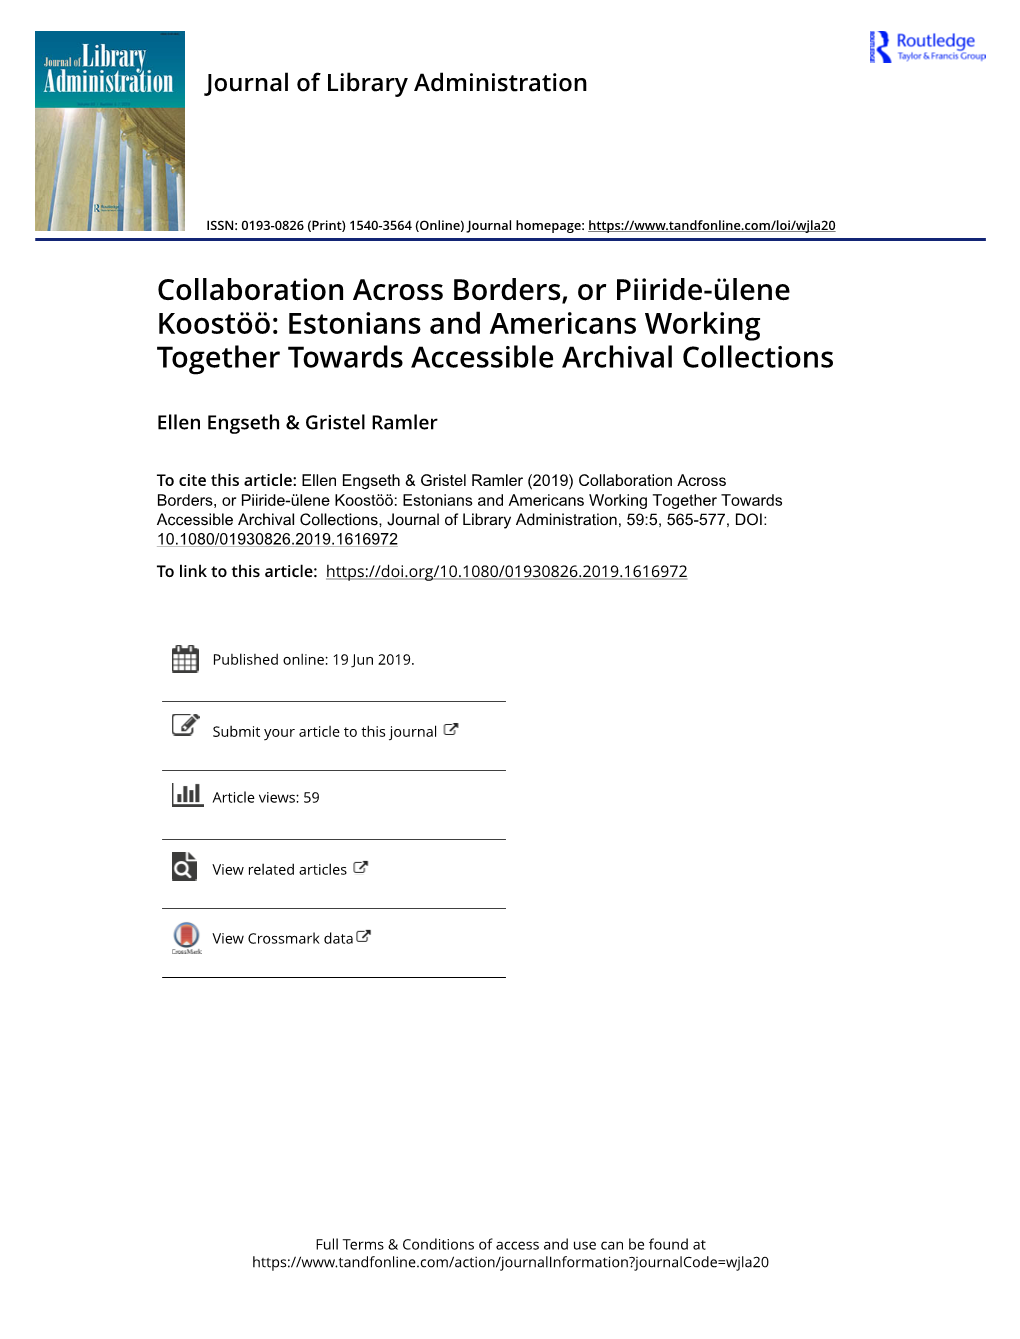 Collaboration Across Borders, Or Piiride-Ülene Koostöö: Estonians and Americans Working Together Towards Accessible Archival Collections